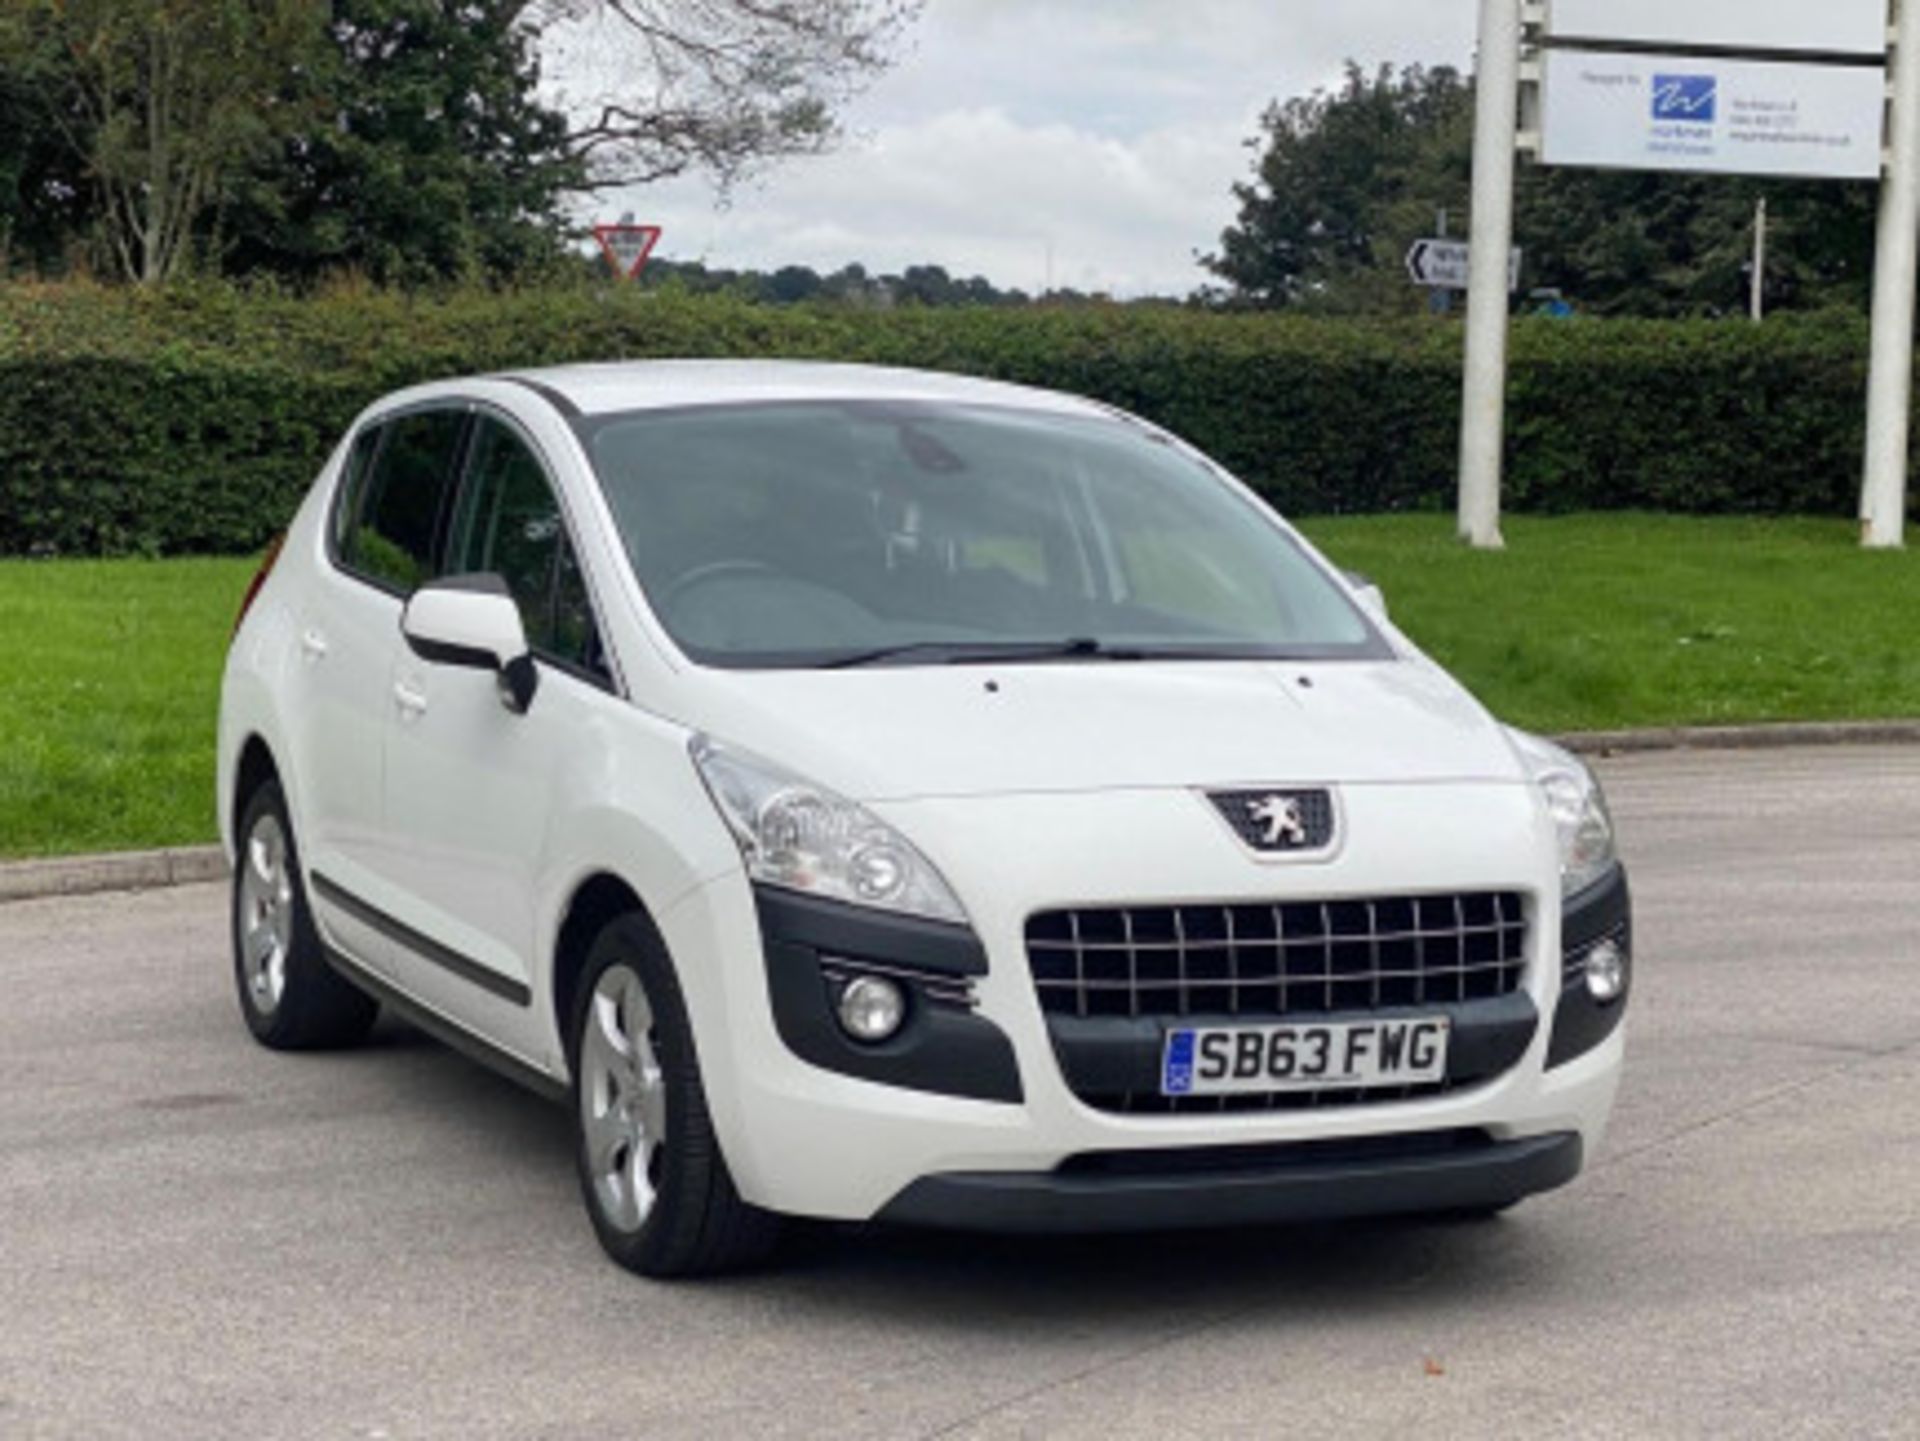 2013 PEUGEOT 3008 1.6 HDI ACTIVE EURO 5 5DR >>--NO VAT ON HAMMER--<< - Image 37 of 69